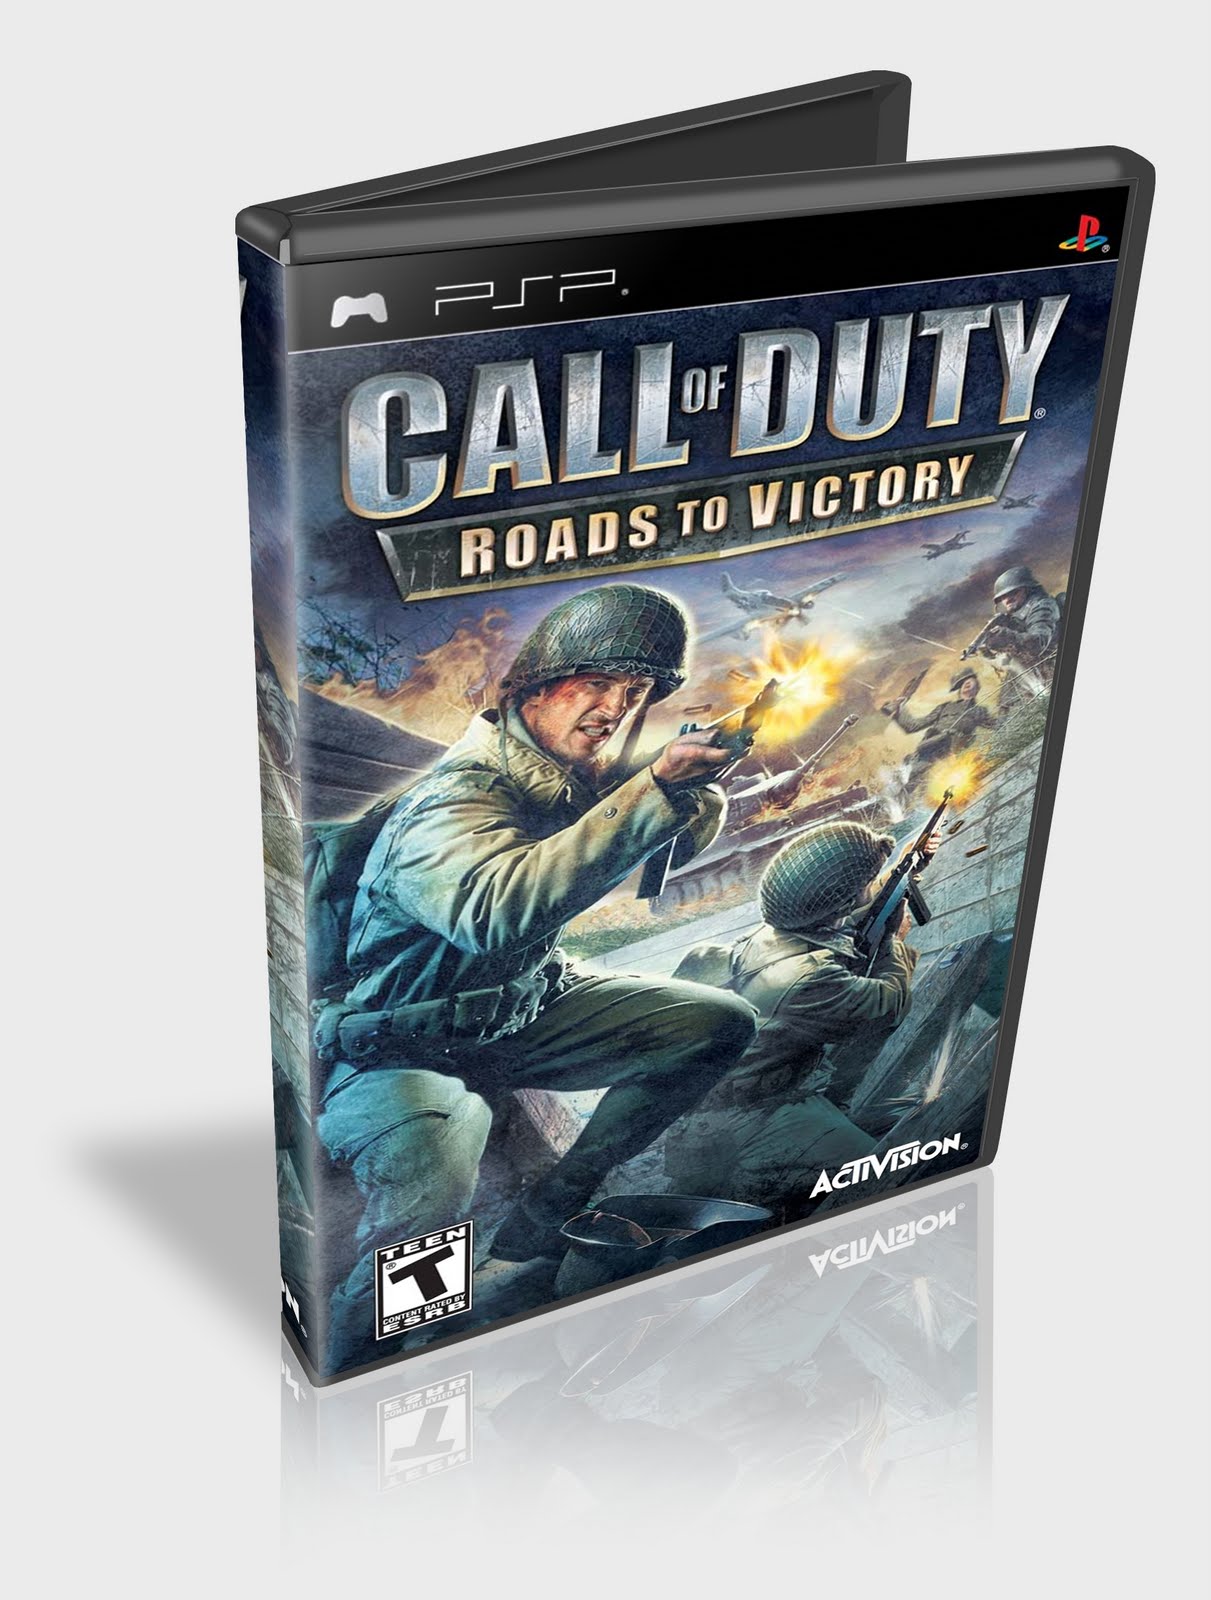 Nome: Call of Duty Road to Victory Estilo: FPS Fabricante: Activision ...